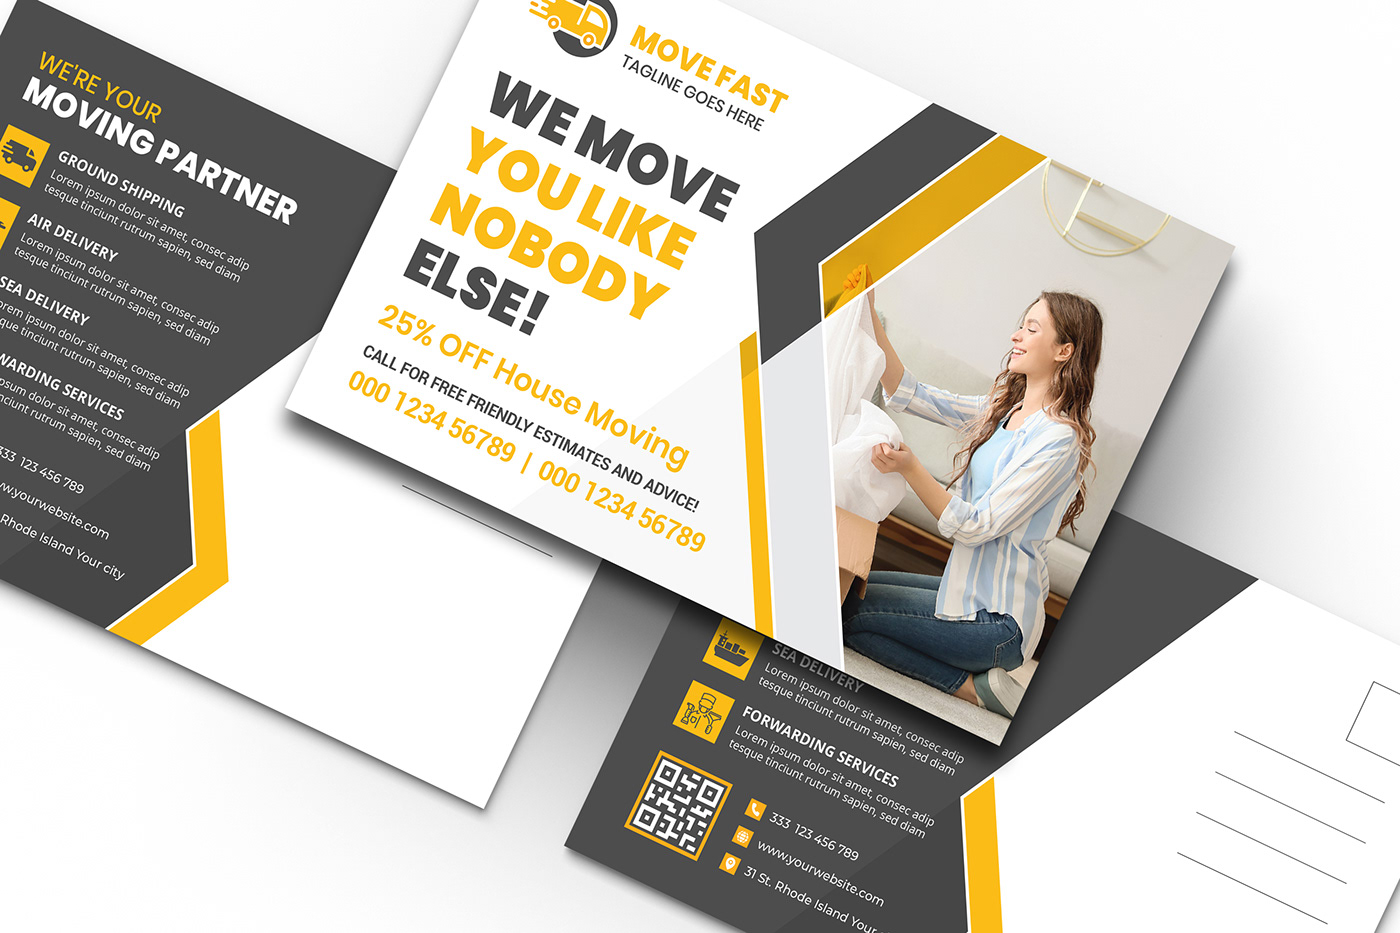 commercial design HOMESWEETHOME househunting localmovers Love movingcompanies movingservice postcard design recidential